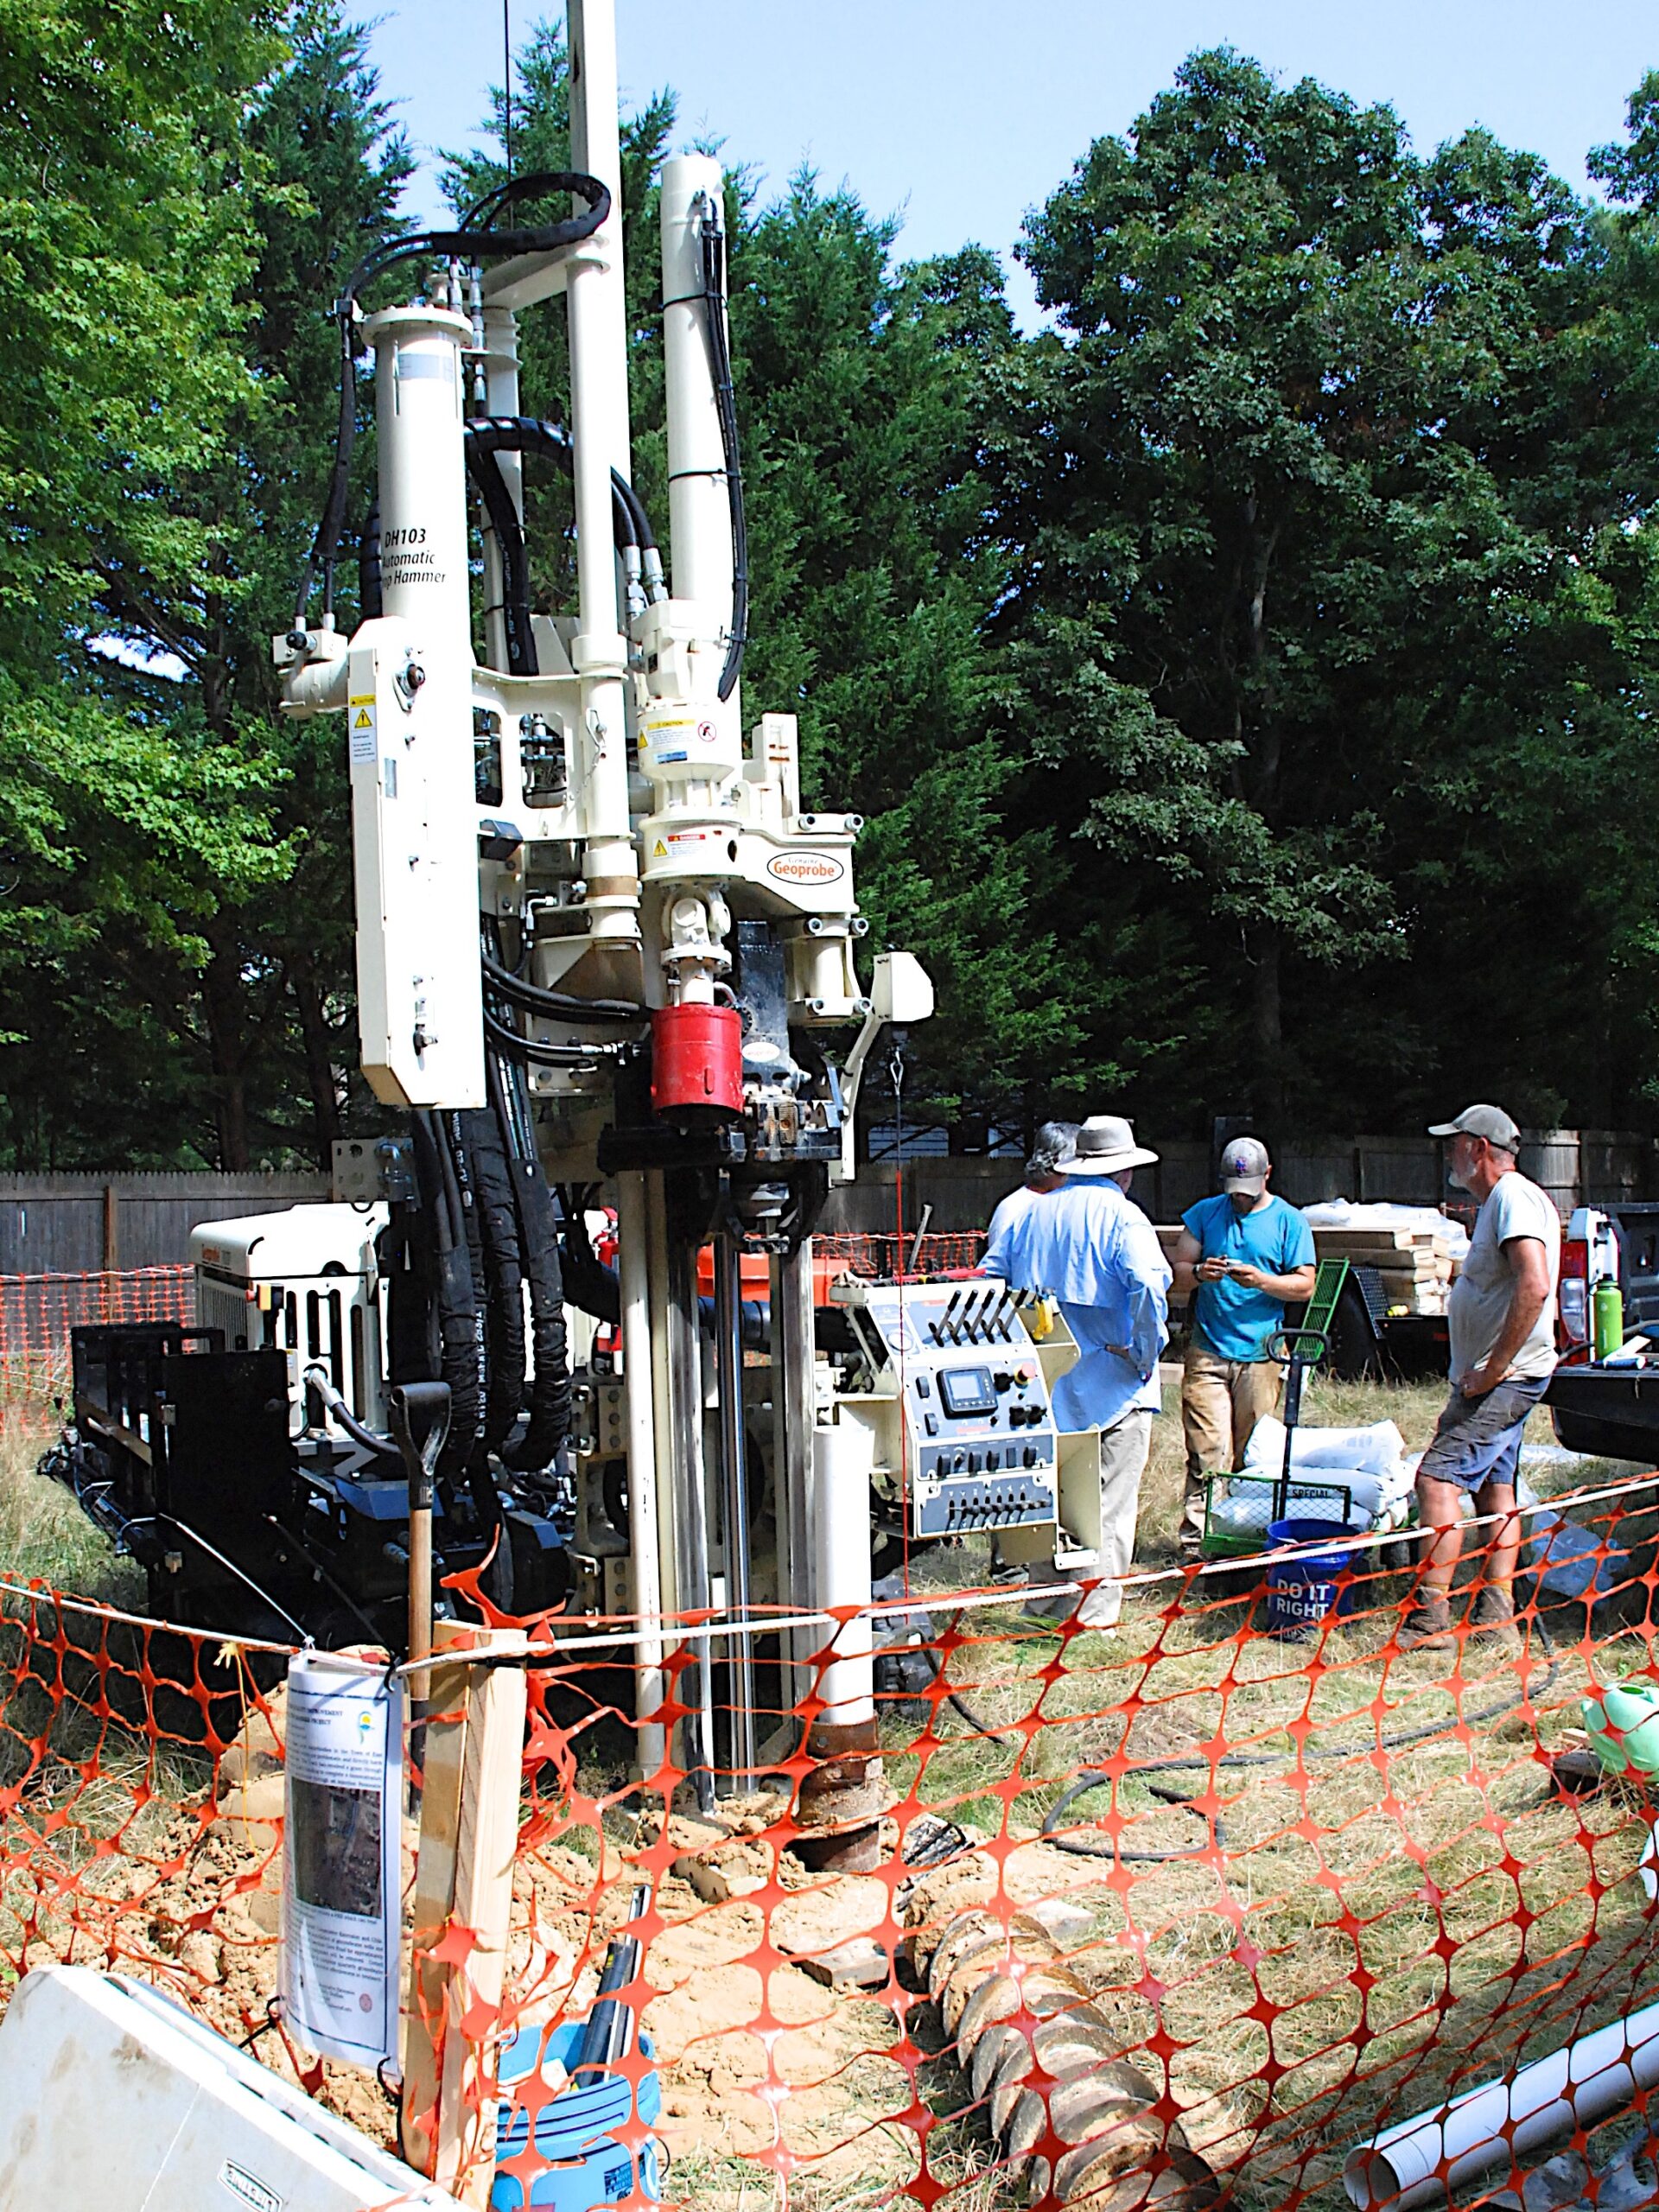 Crews began drilling injection wells near Tanbark Creek this week. The wells will be filled with a liquid carbon source, like vegetable oil or molasses, that will absorb nitrogen flowing through groundwater and keep it from reaching the headwaters of Three Mile Harbor.